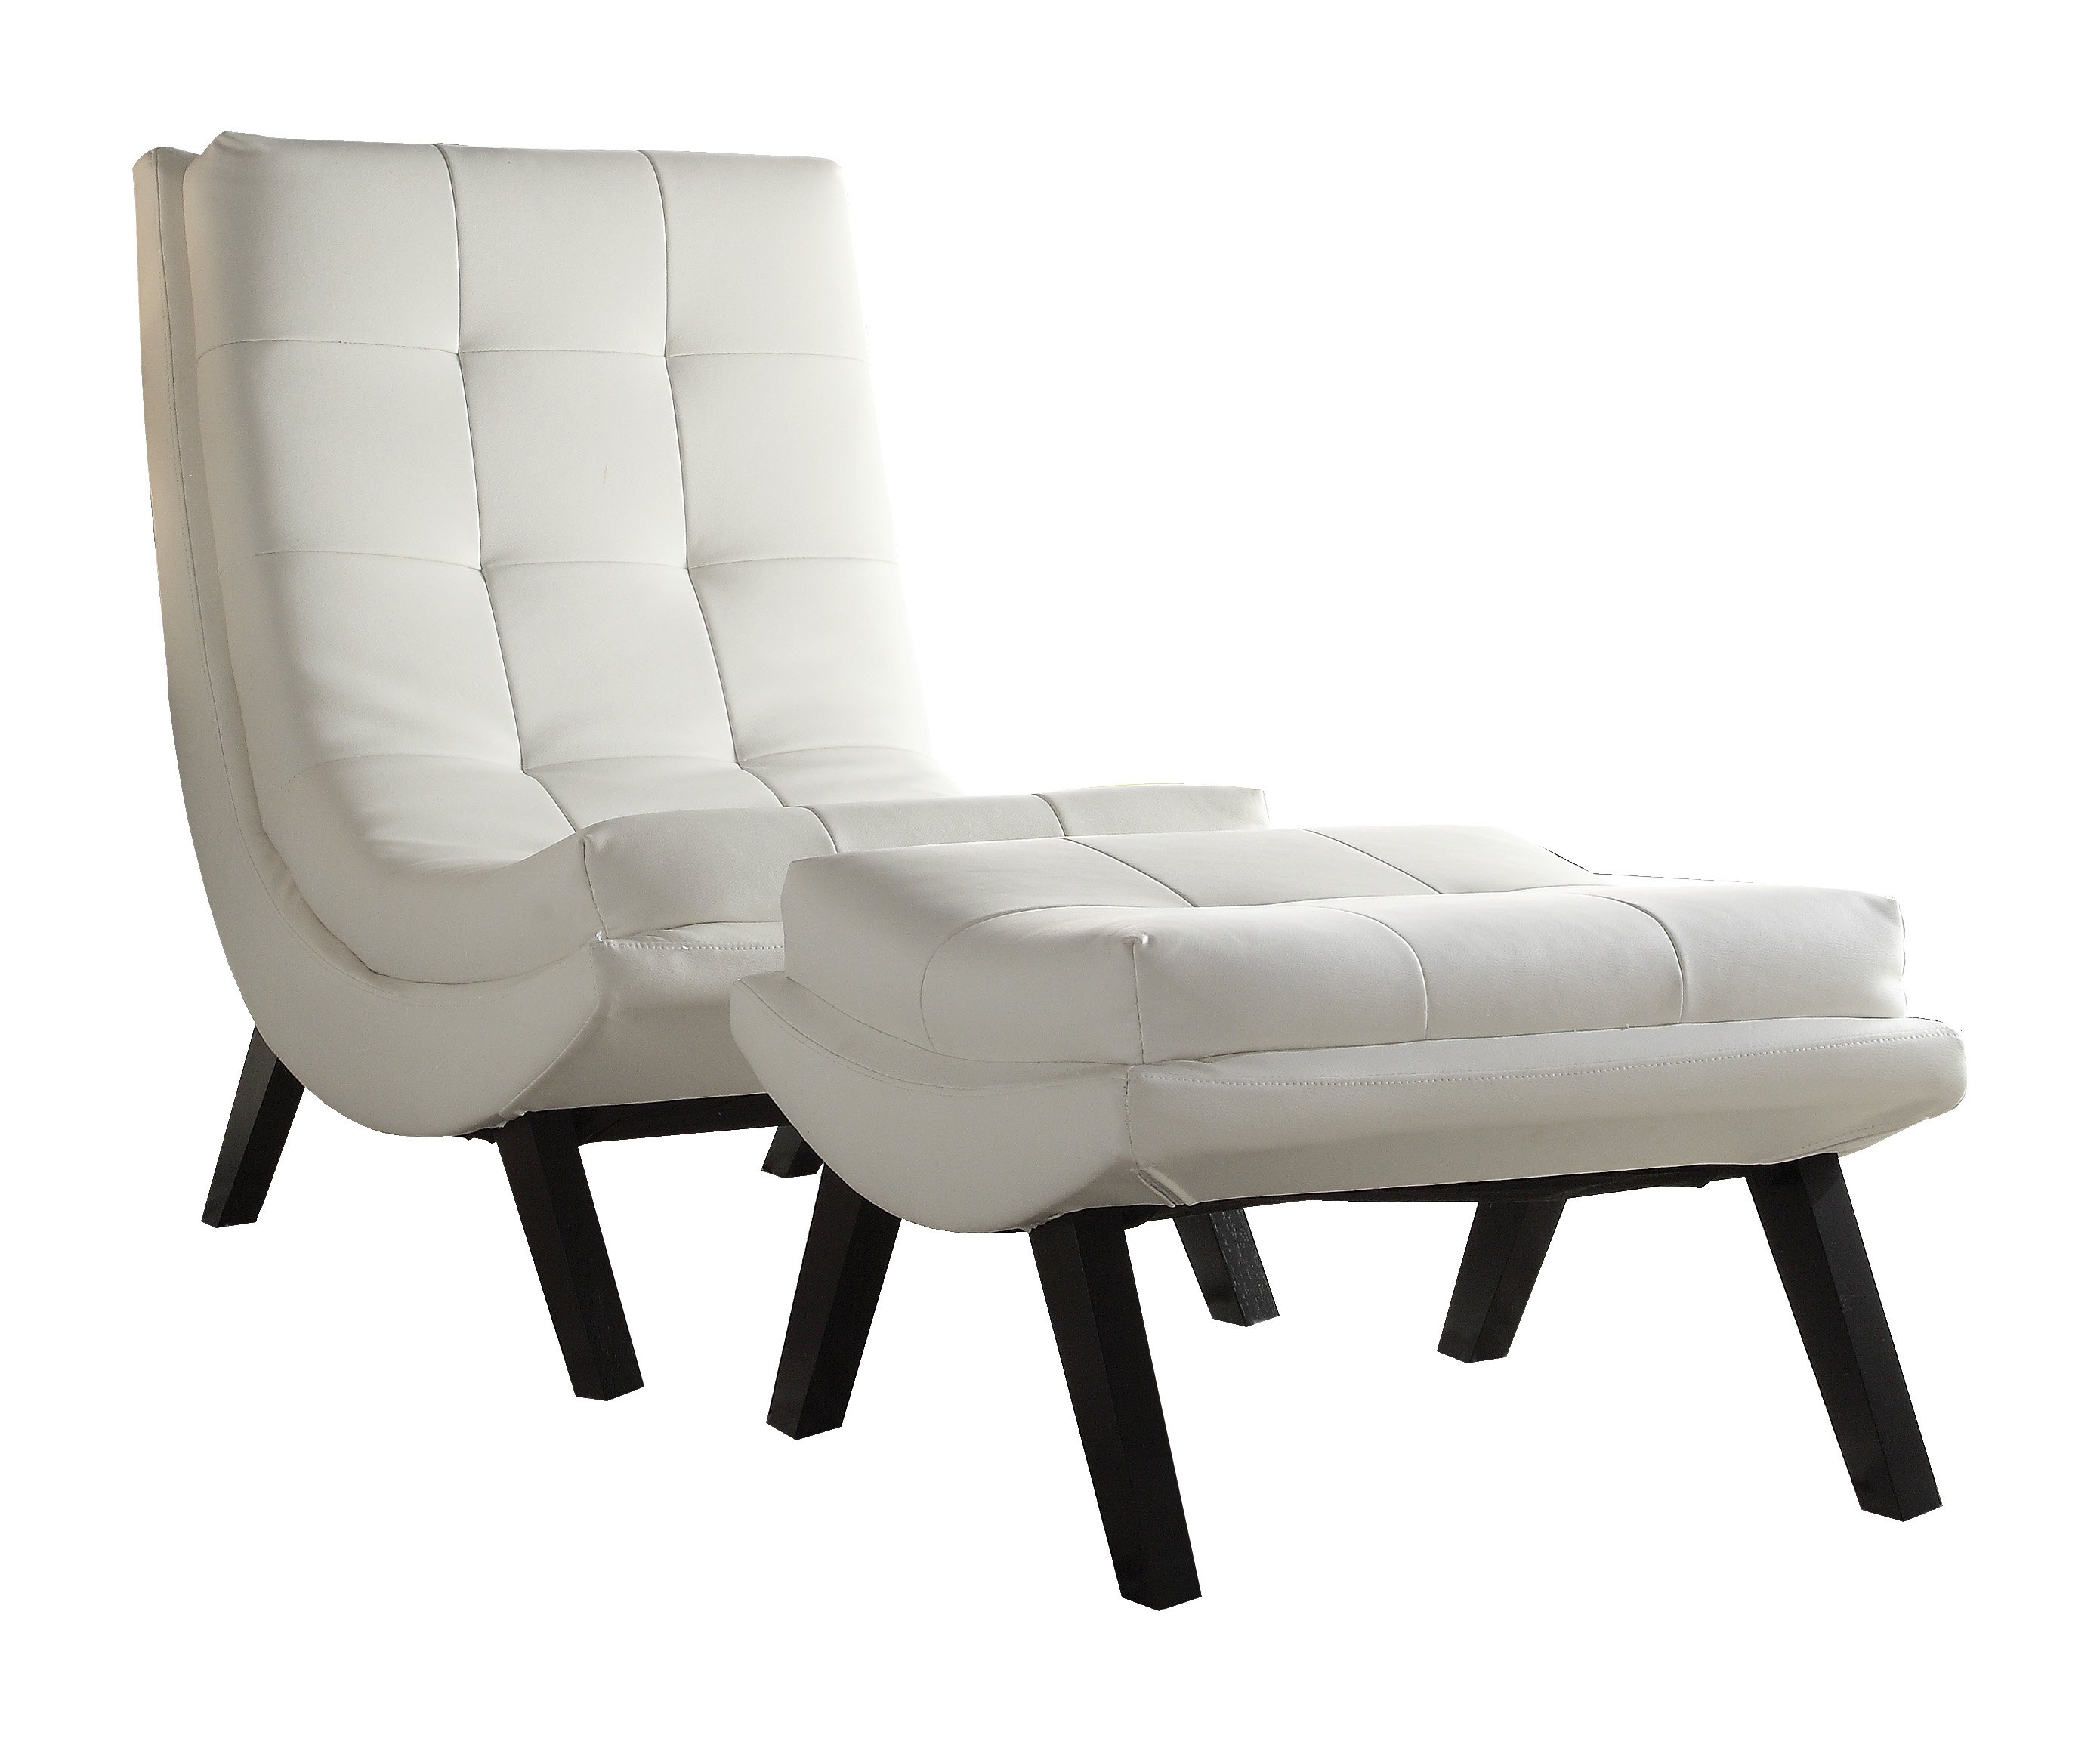 Avenue Six Tustin Lounge Chair and Ottoman Set With White Fuax leather fabric & Black Legs